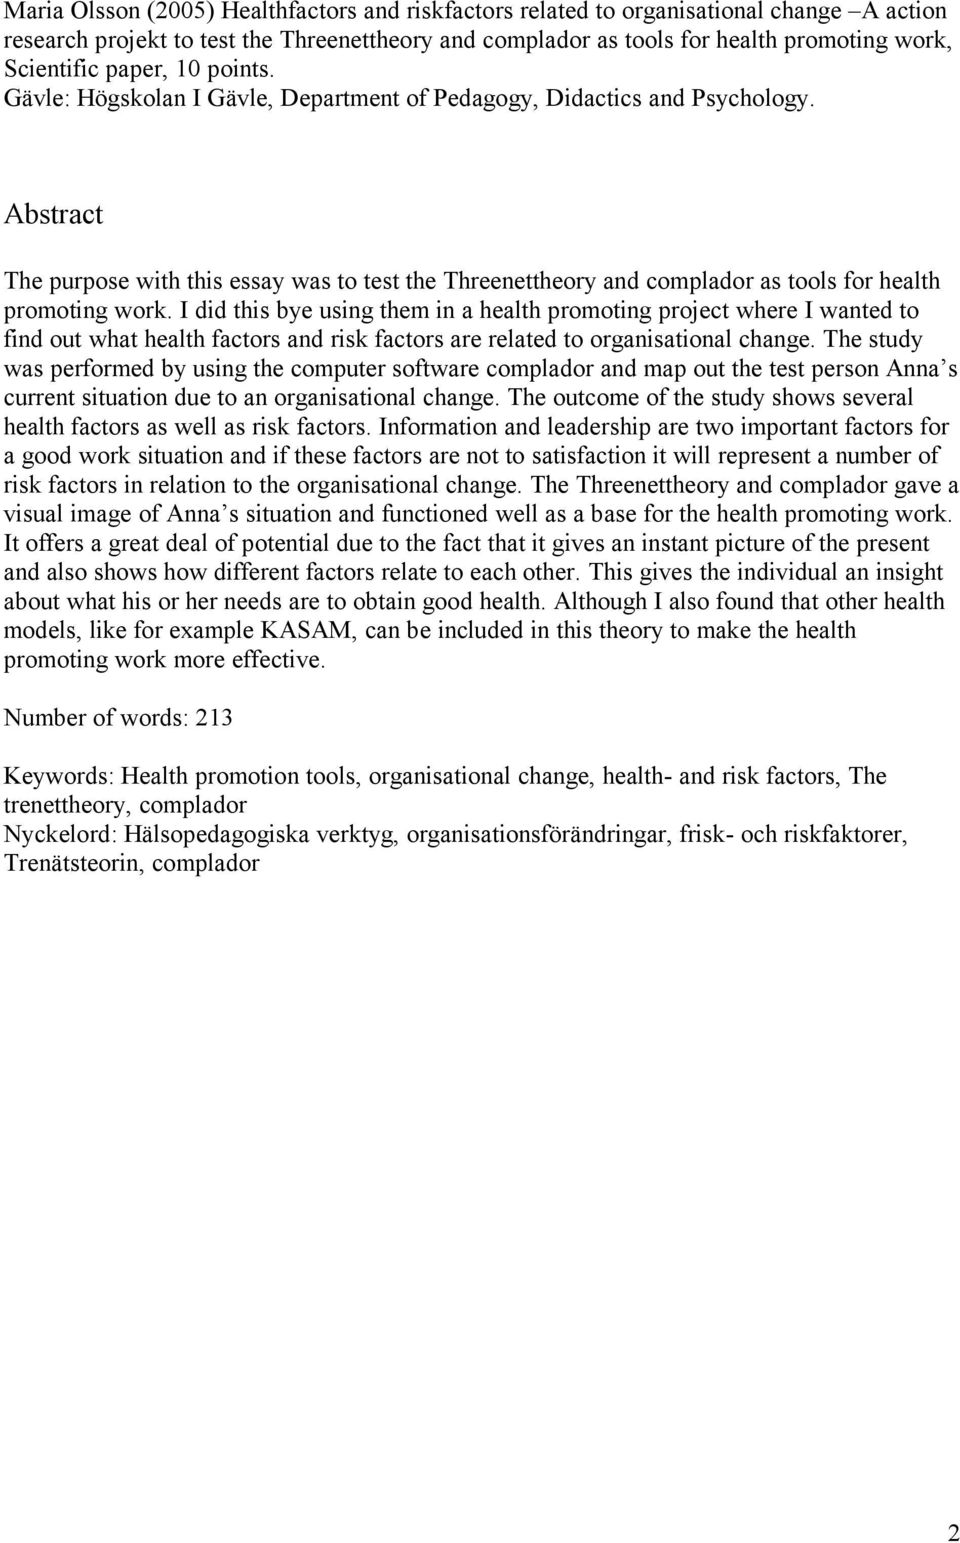 Abstract The purpose with this essay was to test the Threenettheory and complador as tools for health promoting work.